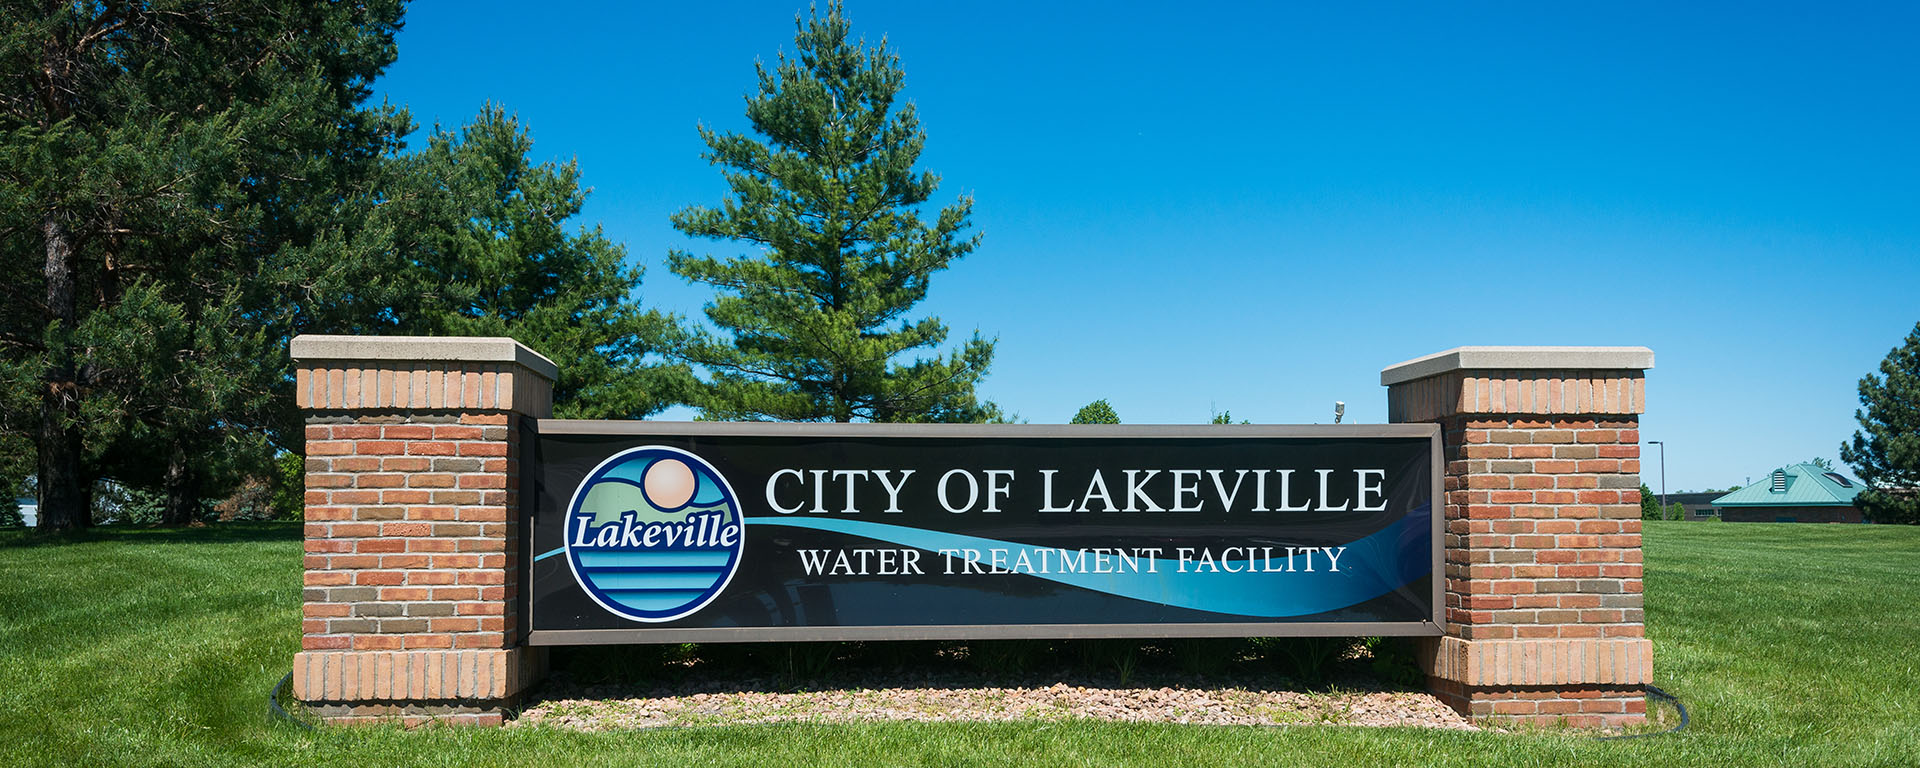 City Of Lakeville Water Treatment Facility